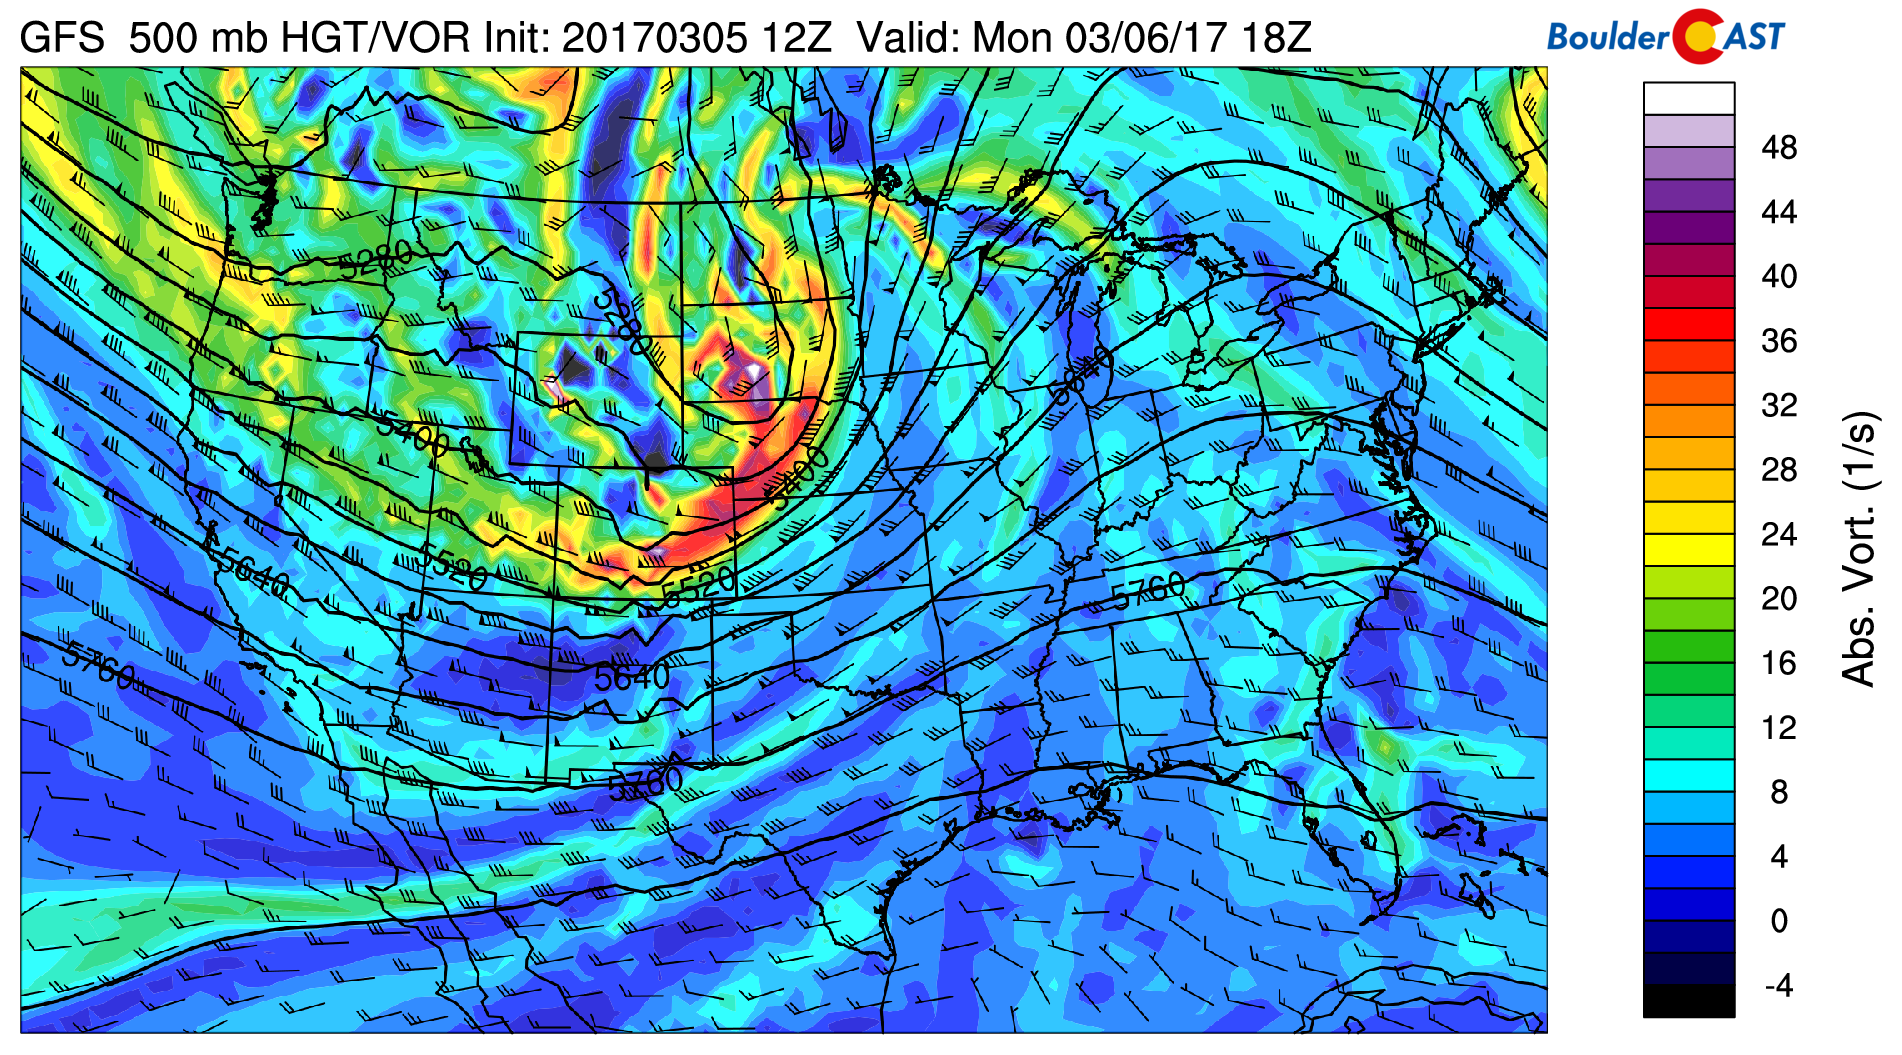 GFS 500 mb absolute vorticity for this afternoon